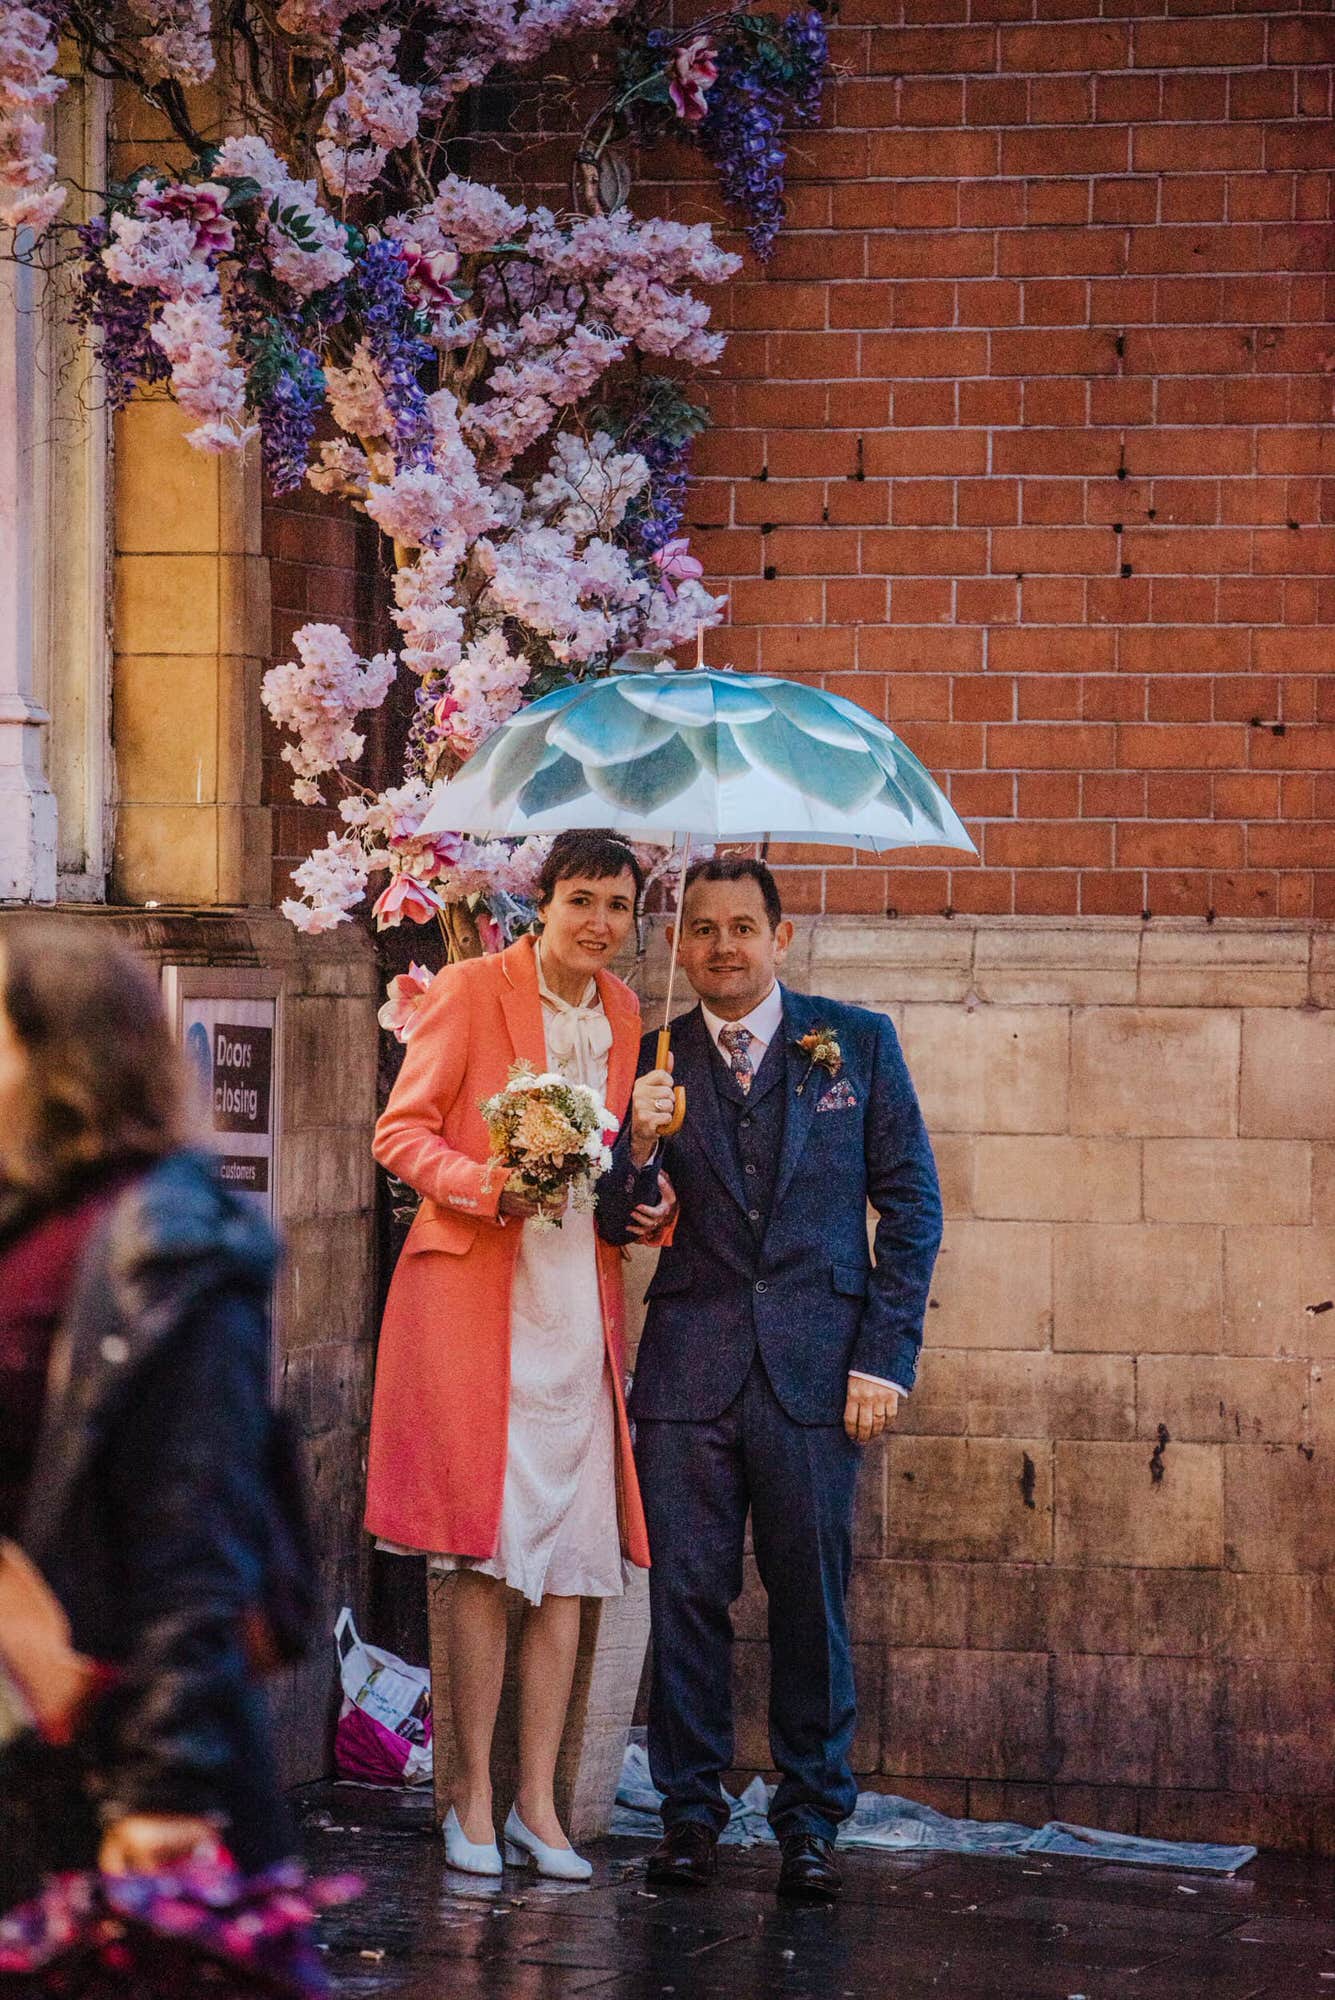 Katya in silk vintage weddign dress, Brett in blue suit at the Old Marylebone registry office London couples shot at the Piccadilly circus